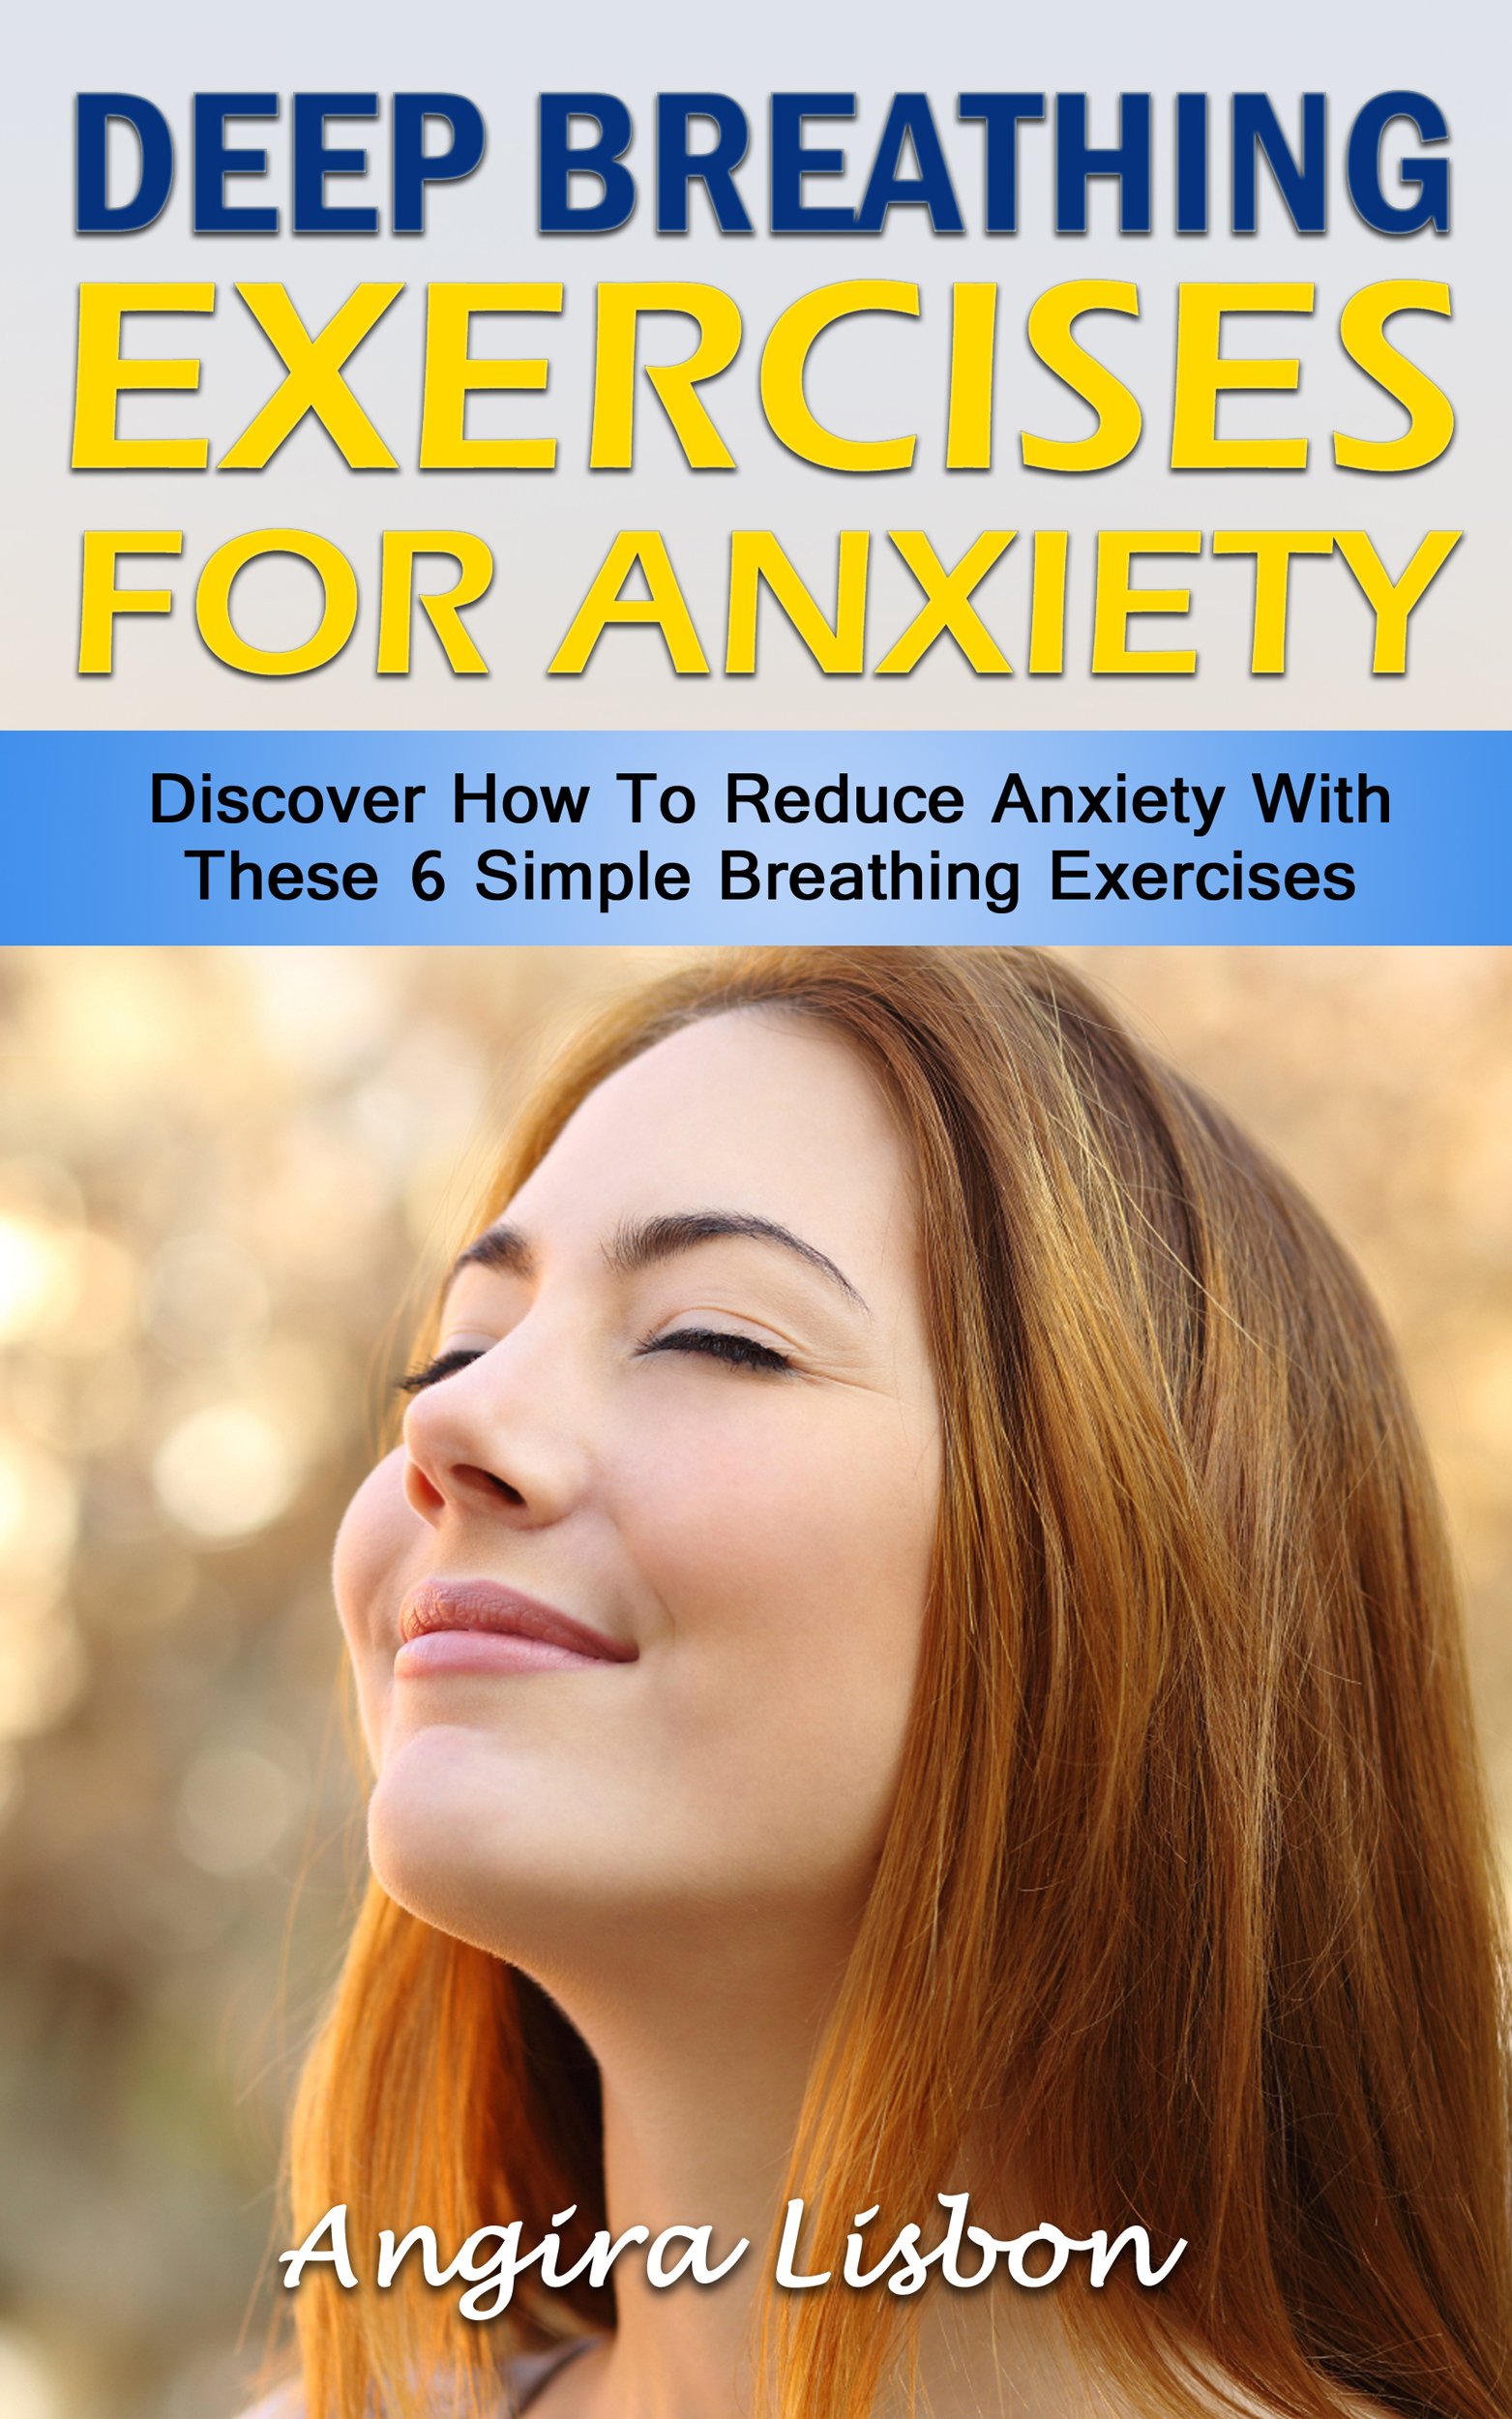 Deep Breathing Exercises For Anxiety: Discover How To Reduce Anxiety With These 6 Simple Breathing Exercises